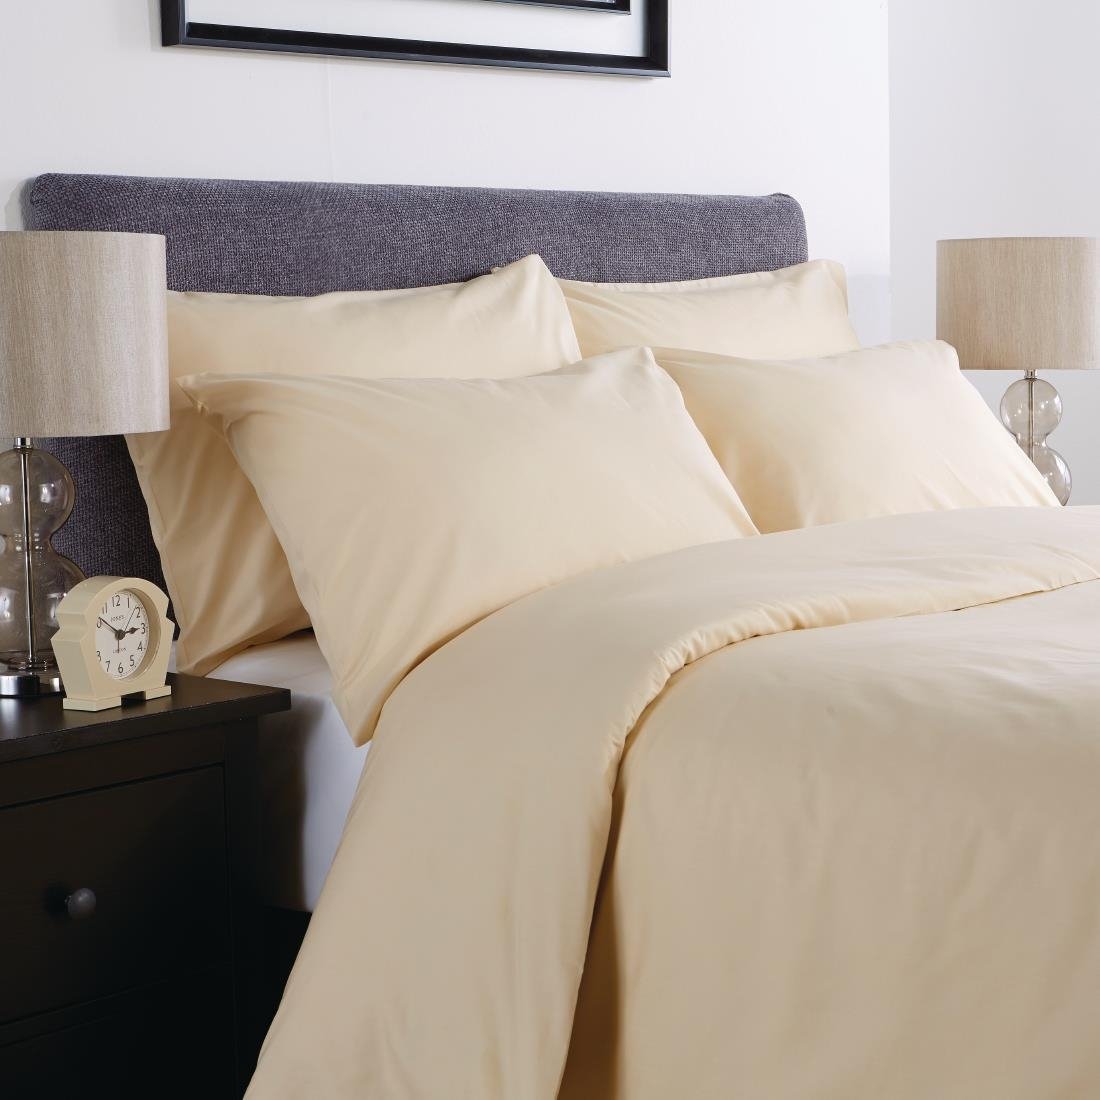 GU157 Mitre Comfort Percale Fitted Sheet Oatmeal Super King